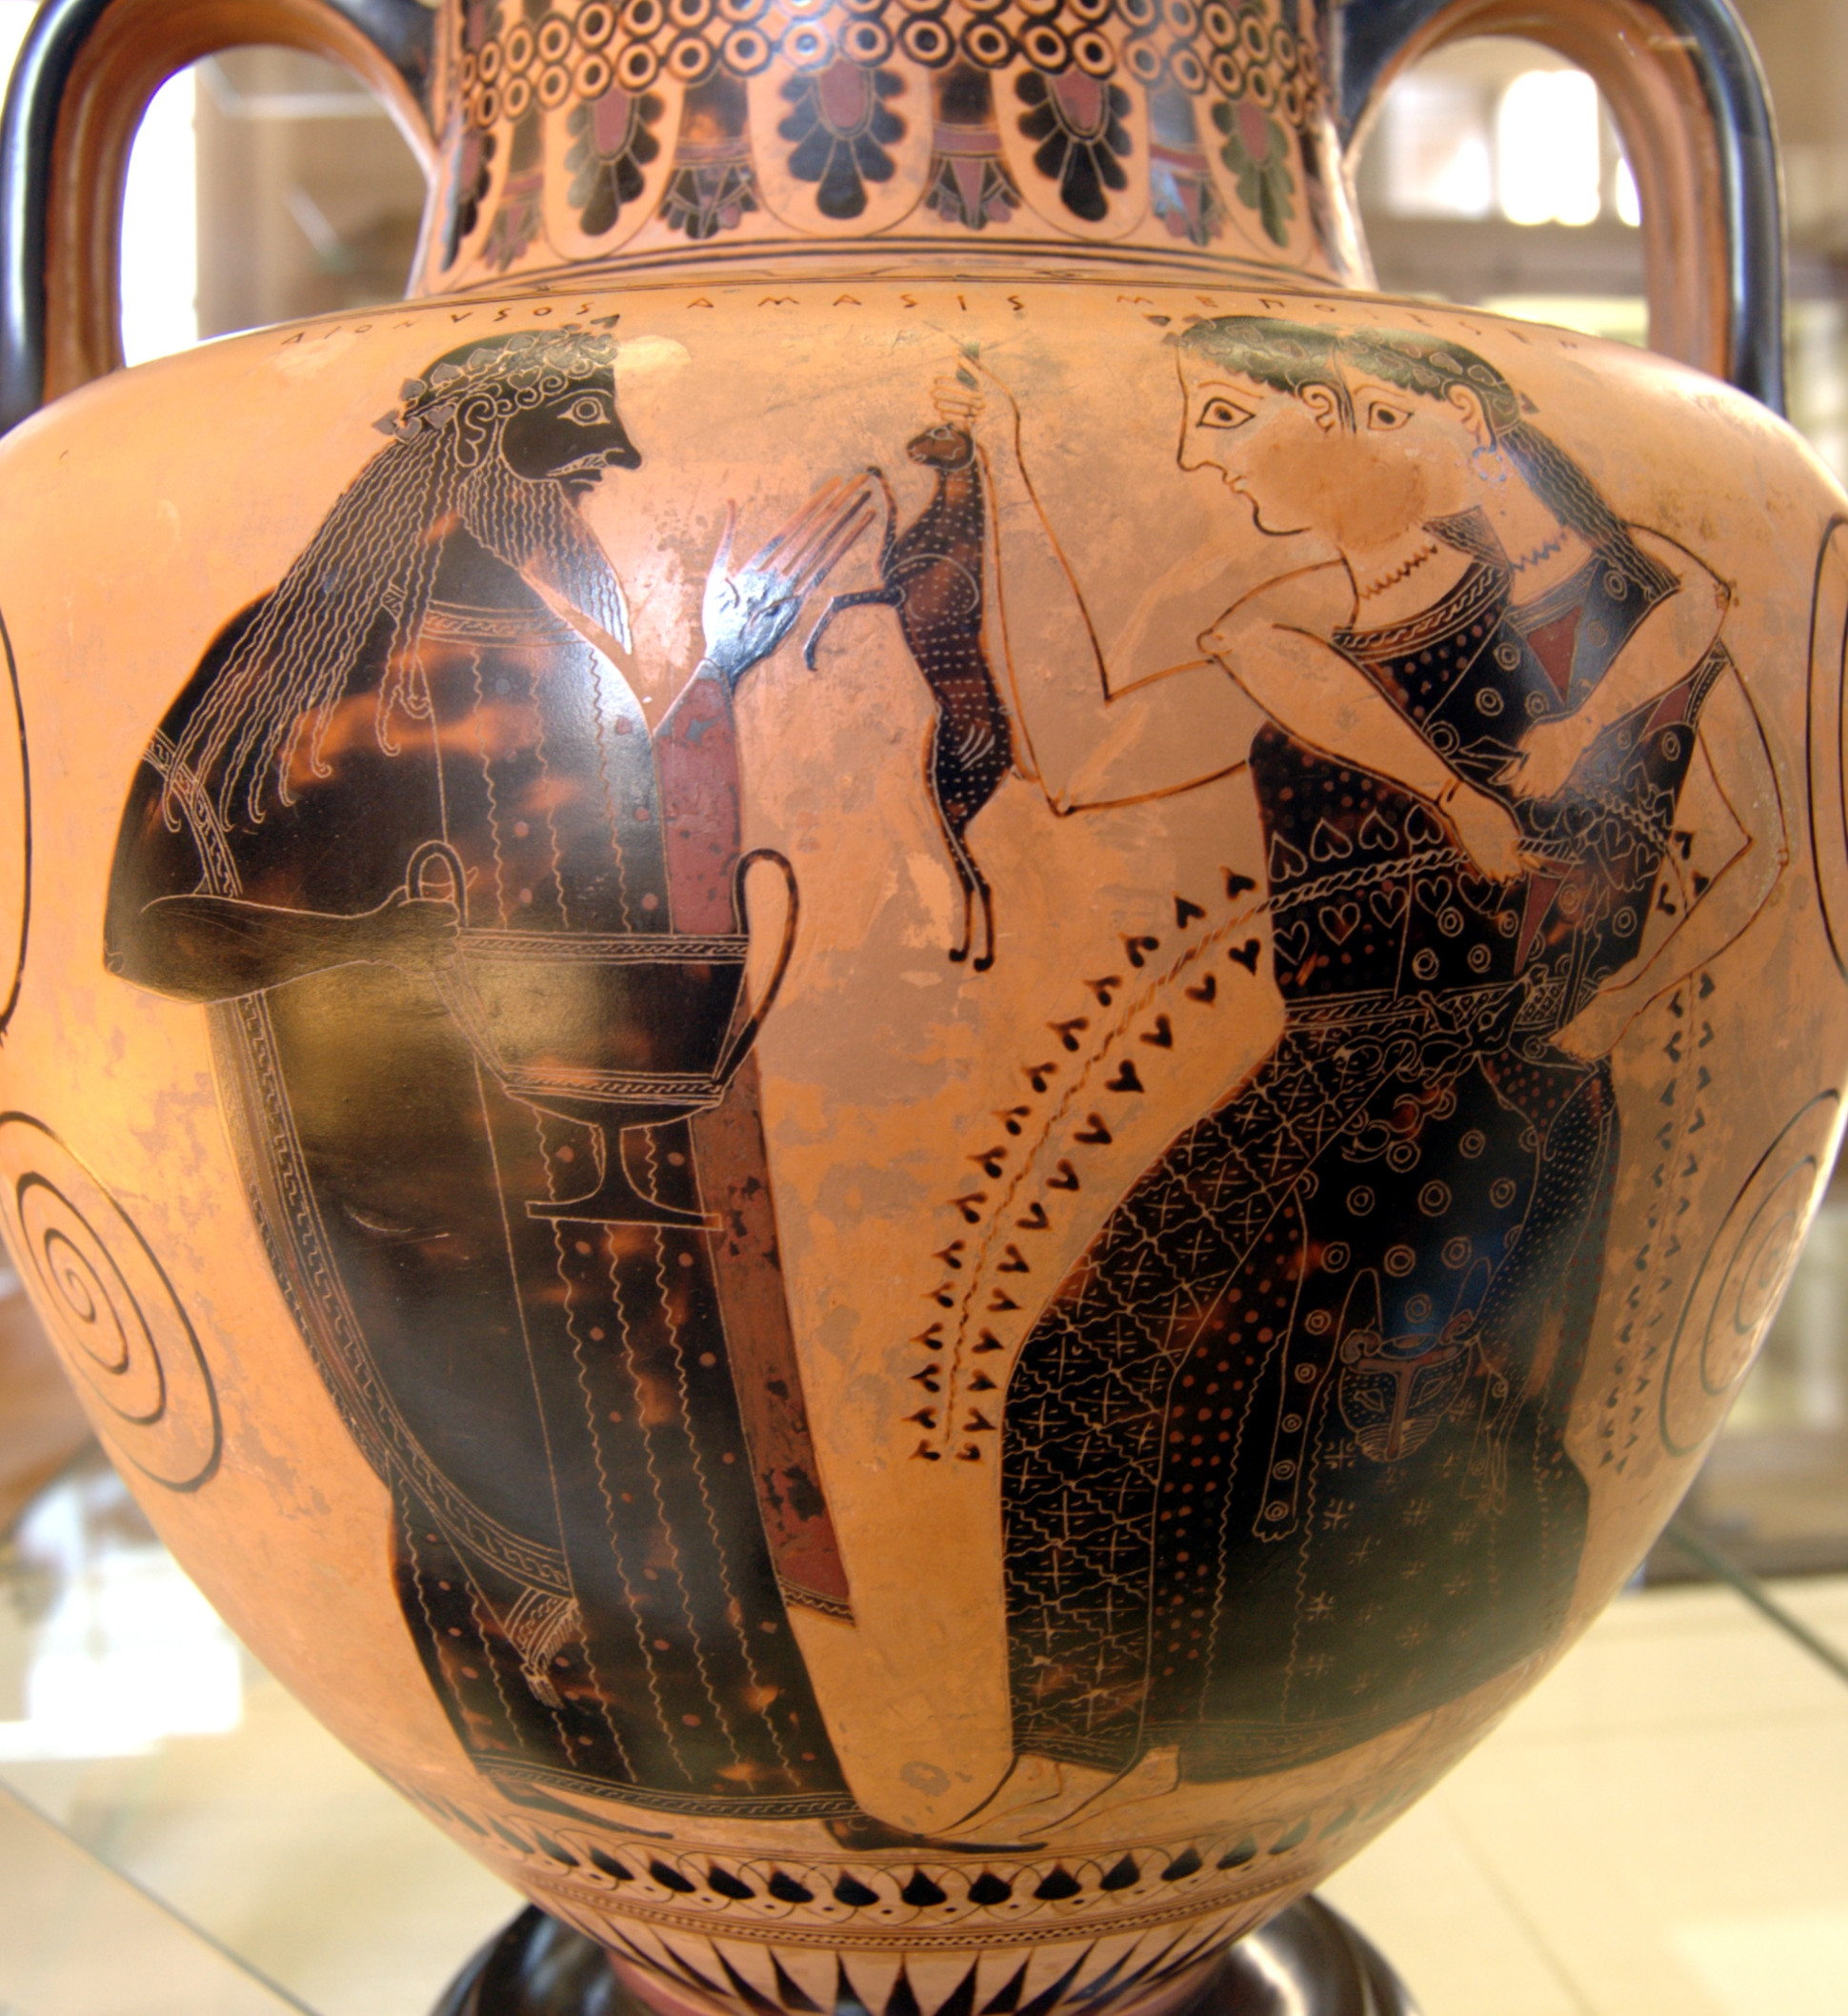 22 Lovable Old oriental Vases 2024 free download old oriental vases of black figure pottery wikipedia pertaining to dionysus and two maenads one holding a hare neck amphora ca 550 530 bc from vulci now cabinet des madailles de la bibliotha